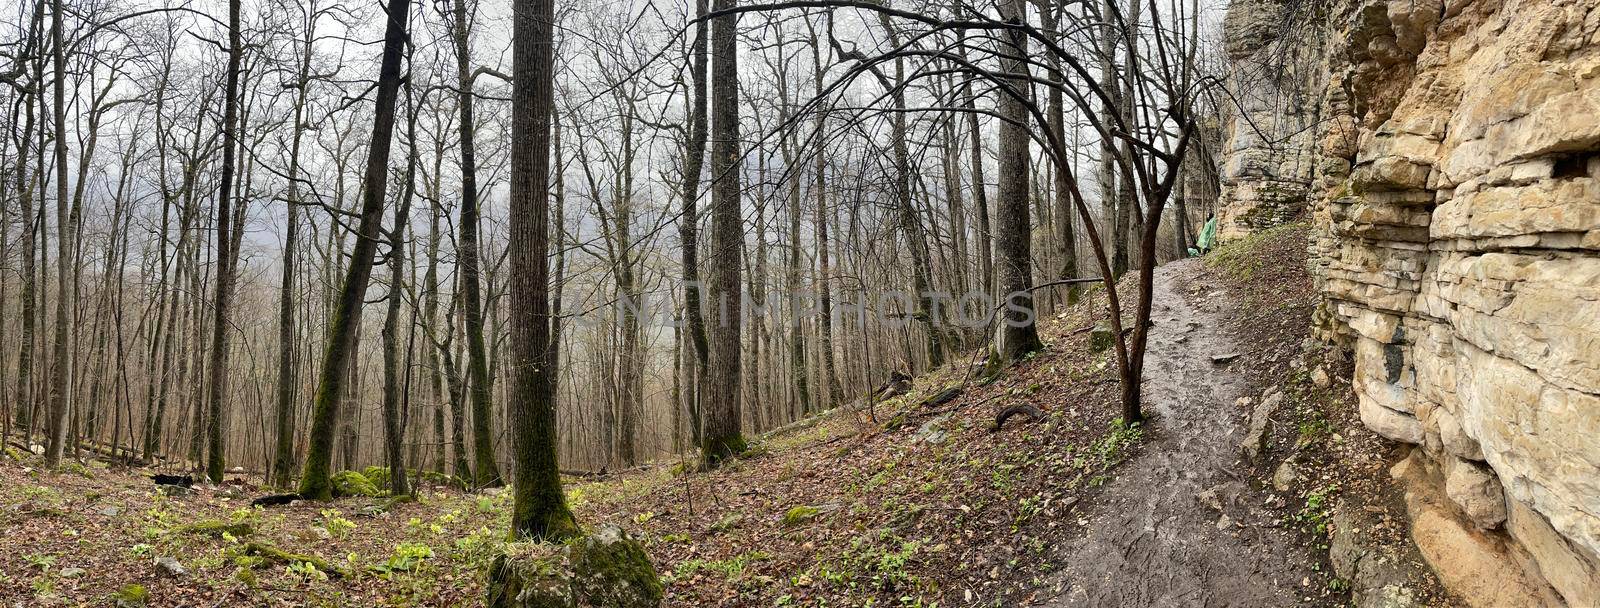 Forest landscape in mountainous terrain. Close up of tree trunks on high ground in springtime